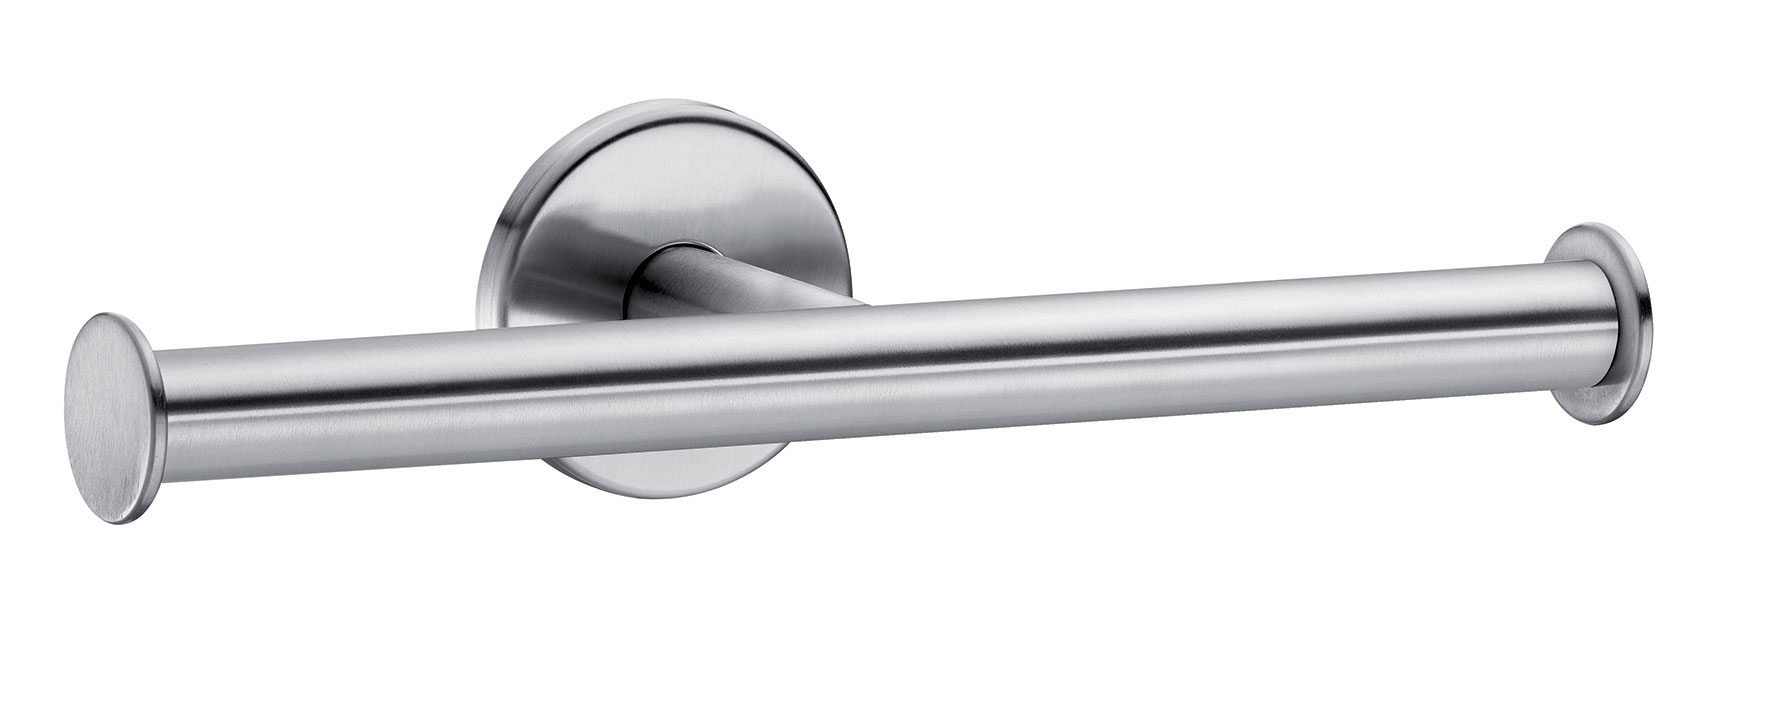 Delabie double toilet roll holder, polished satin stainless steel